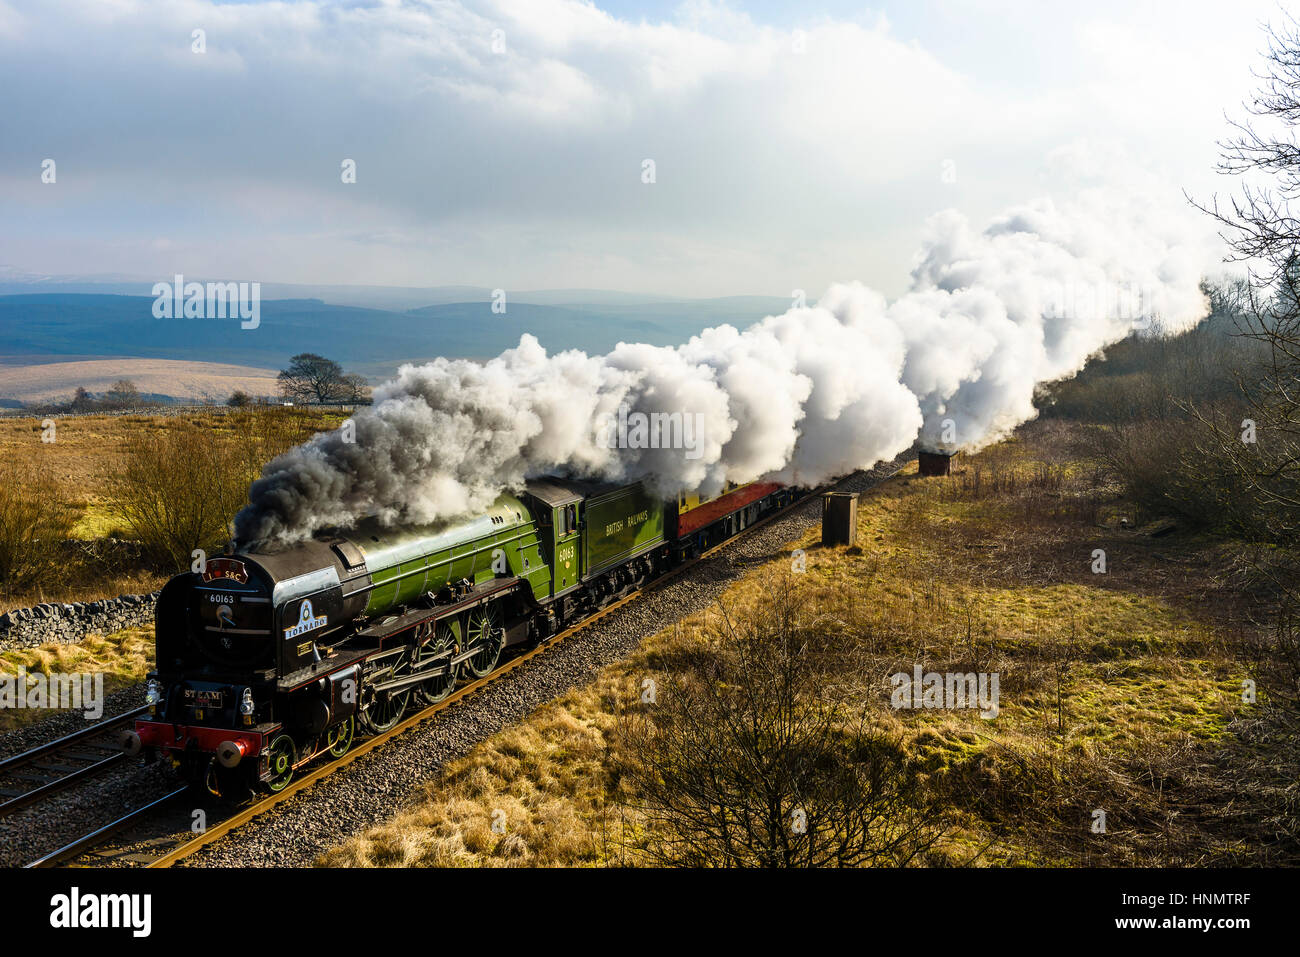 Ribblesdale, North Yorkshire, UK. 14th Feb, 2017. Steam locomotive Tornado hauls a train through Ribblesdale on the Settle-Carlisle line. This is the first day of steam-hauled scheduled services on the national rail network since 1968. Services continue on Wednesday and Thursday. The A1 Class Tornado 60163, completed in 2008, is the first main line steam engine to be built in the UK since the 1960s. Credit: Jon Sparks/Alamy Live News Stock Photo